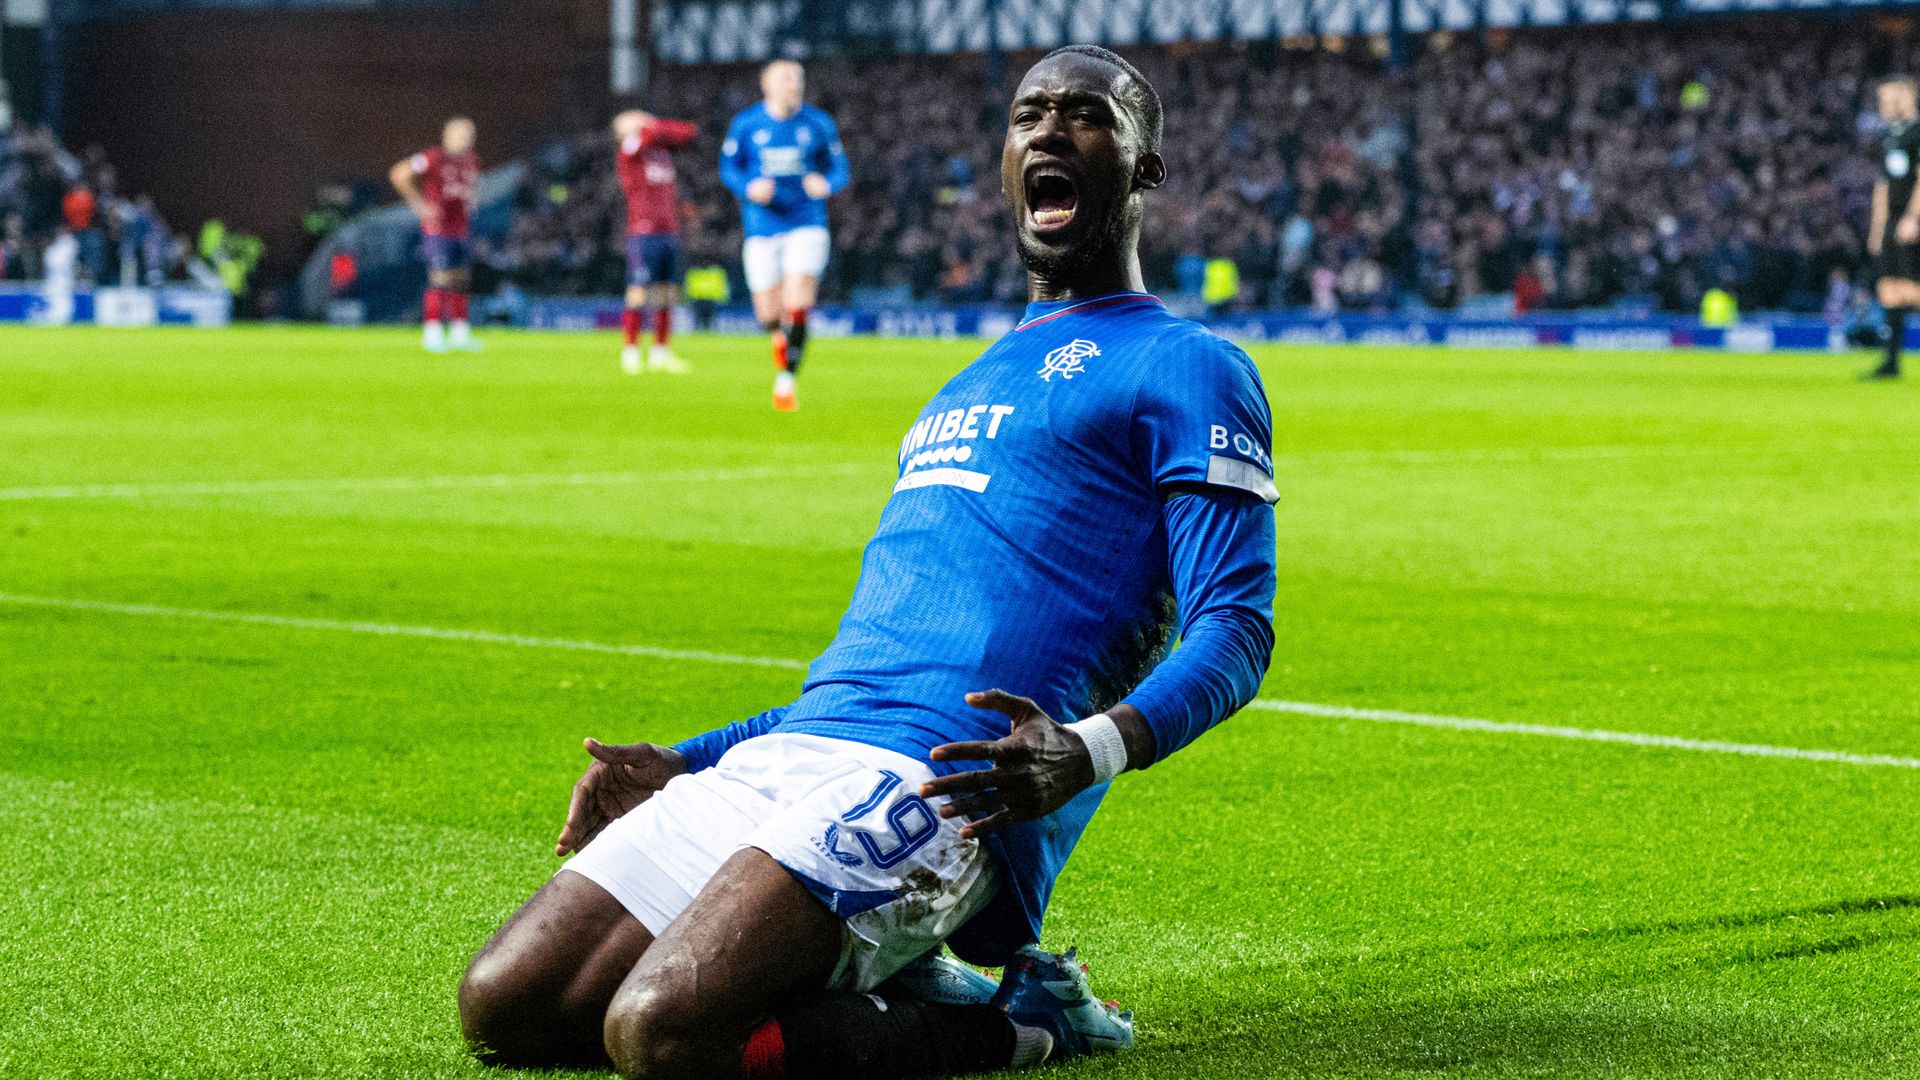 Rangers bounce back from Old Firm defeat with Kilmarnock victory